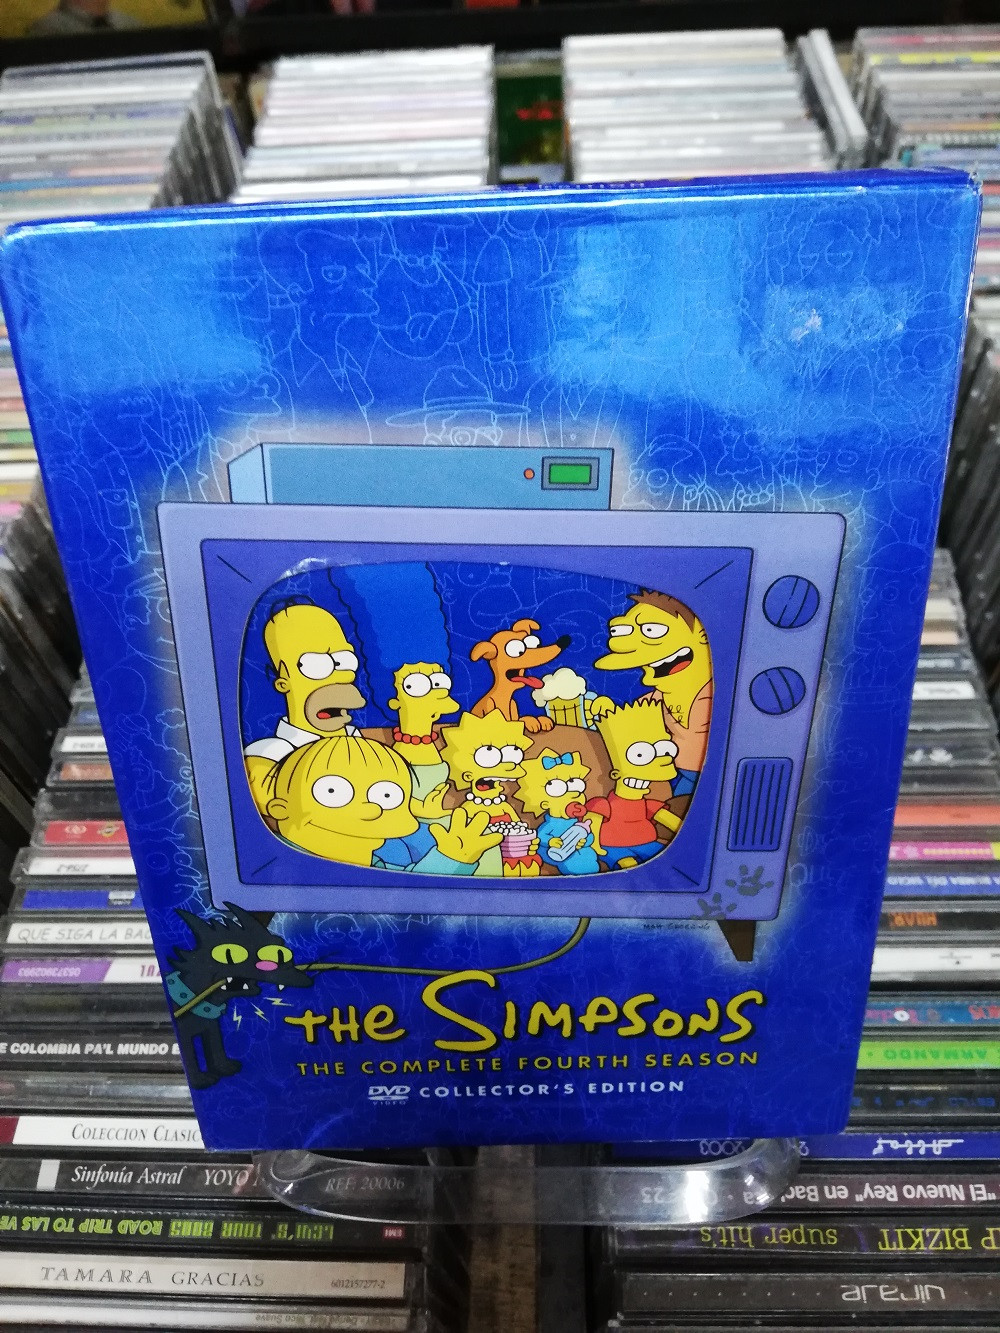 Imagen DVD COLLECTION THE SIMPSONS, THE COMPLETE FOURTH SEASON 1